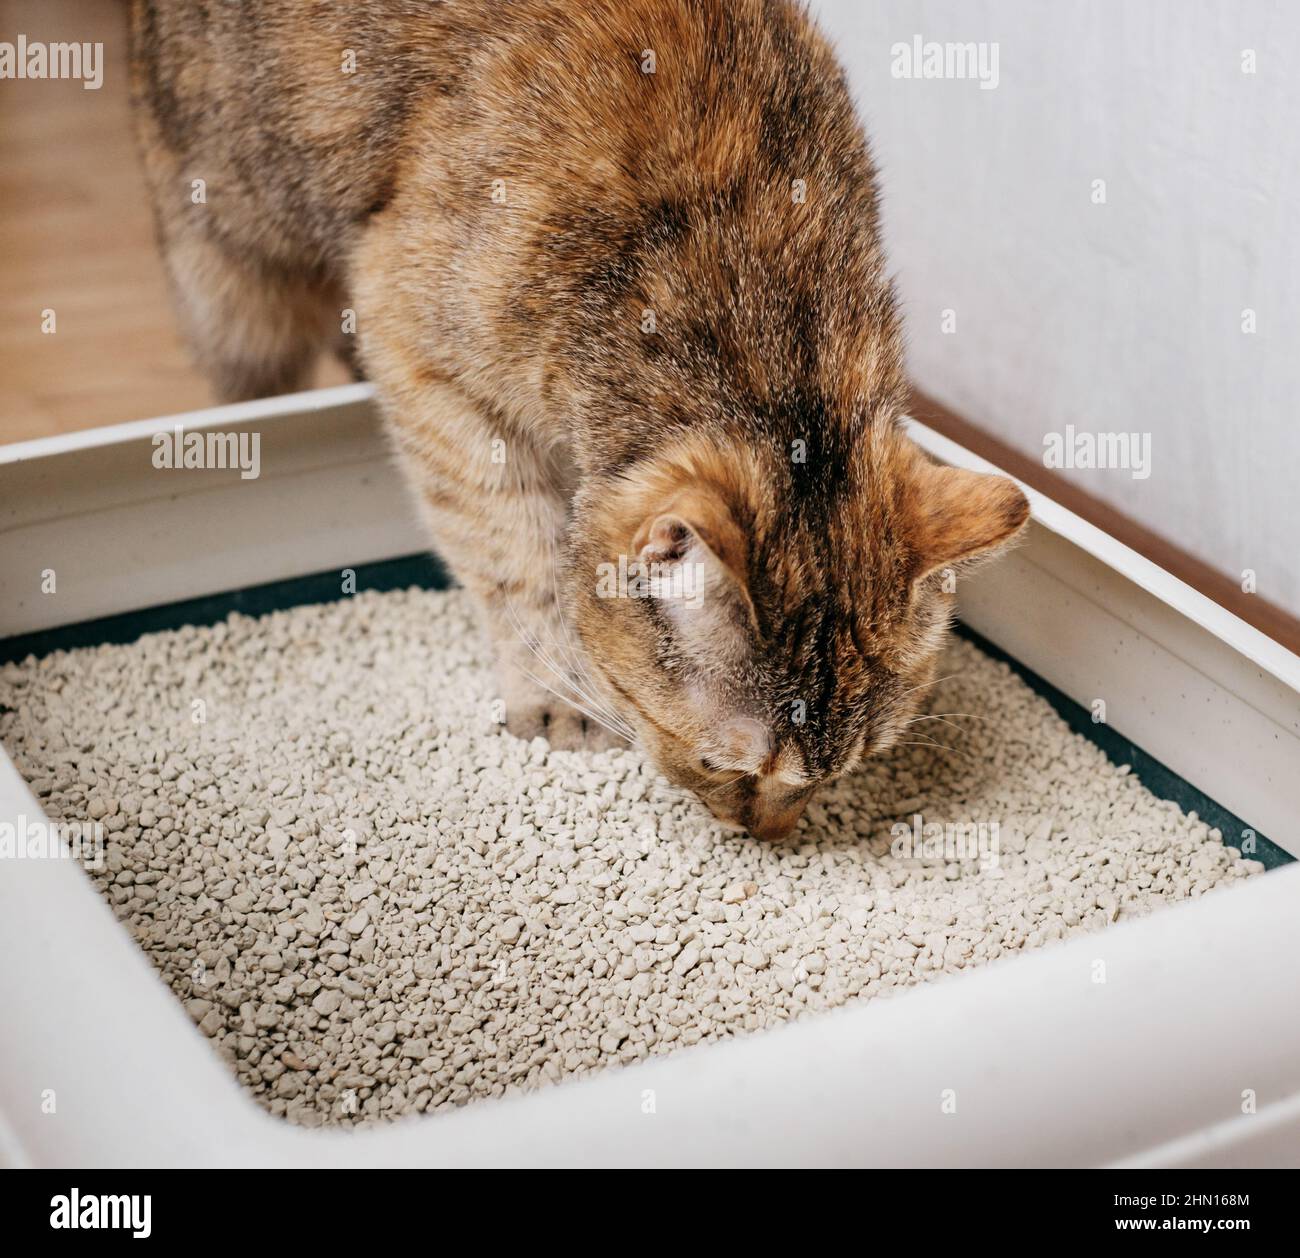 Close-up of a ginger cat sniffing a bulk litter. Stock Photo